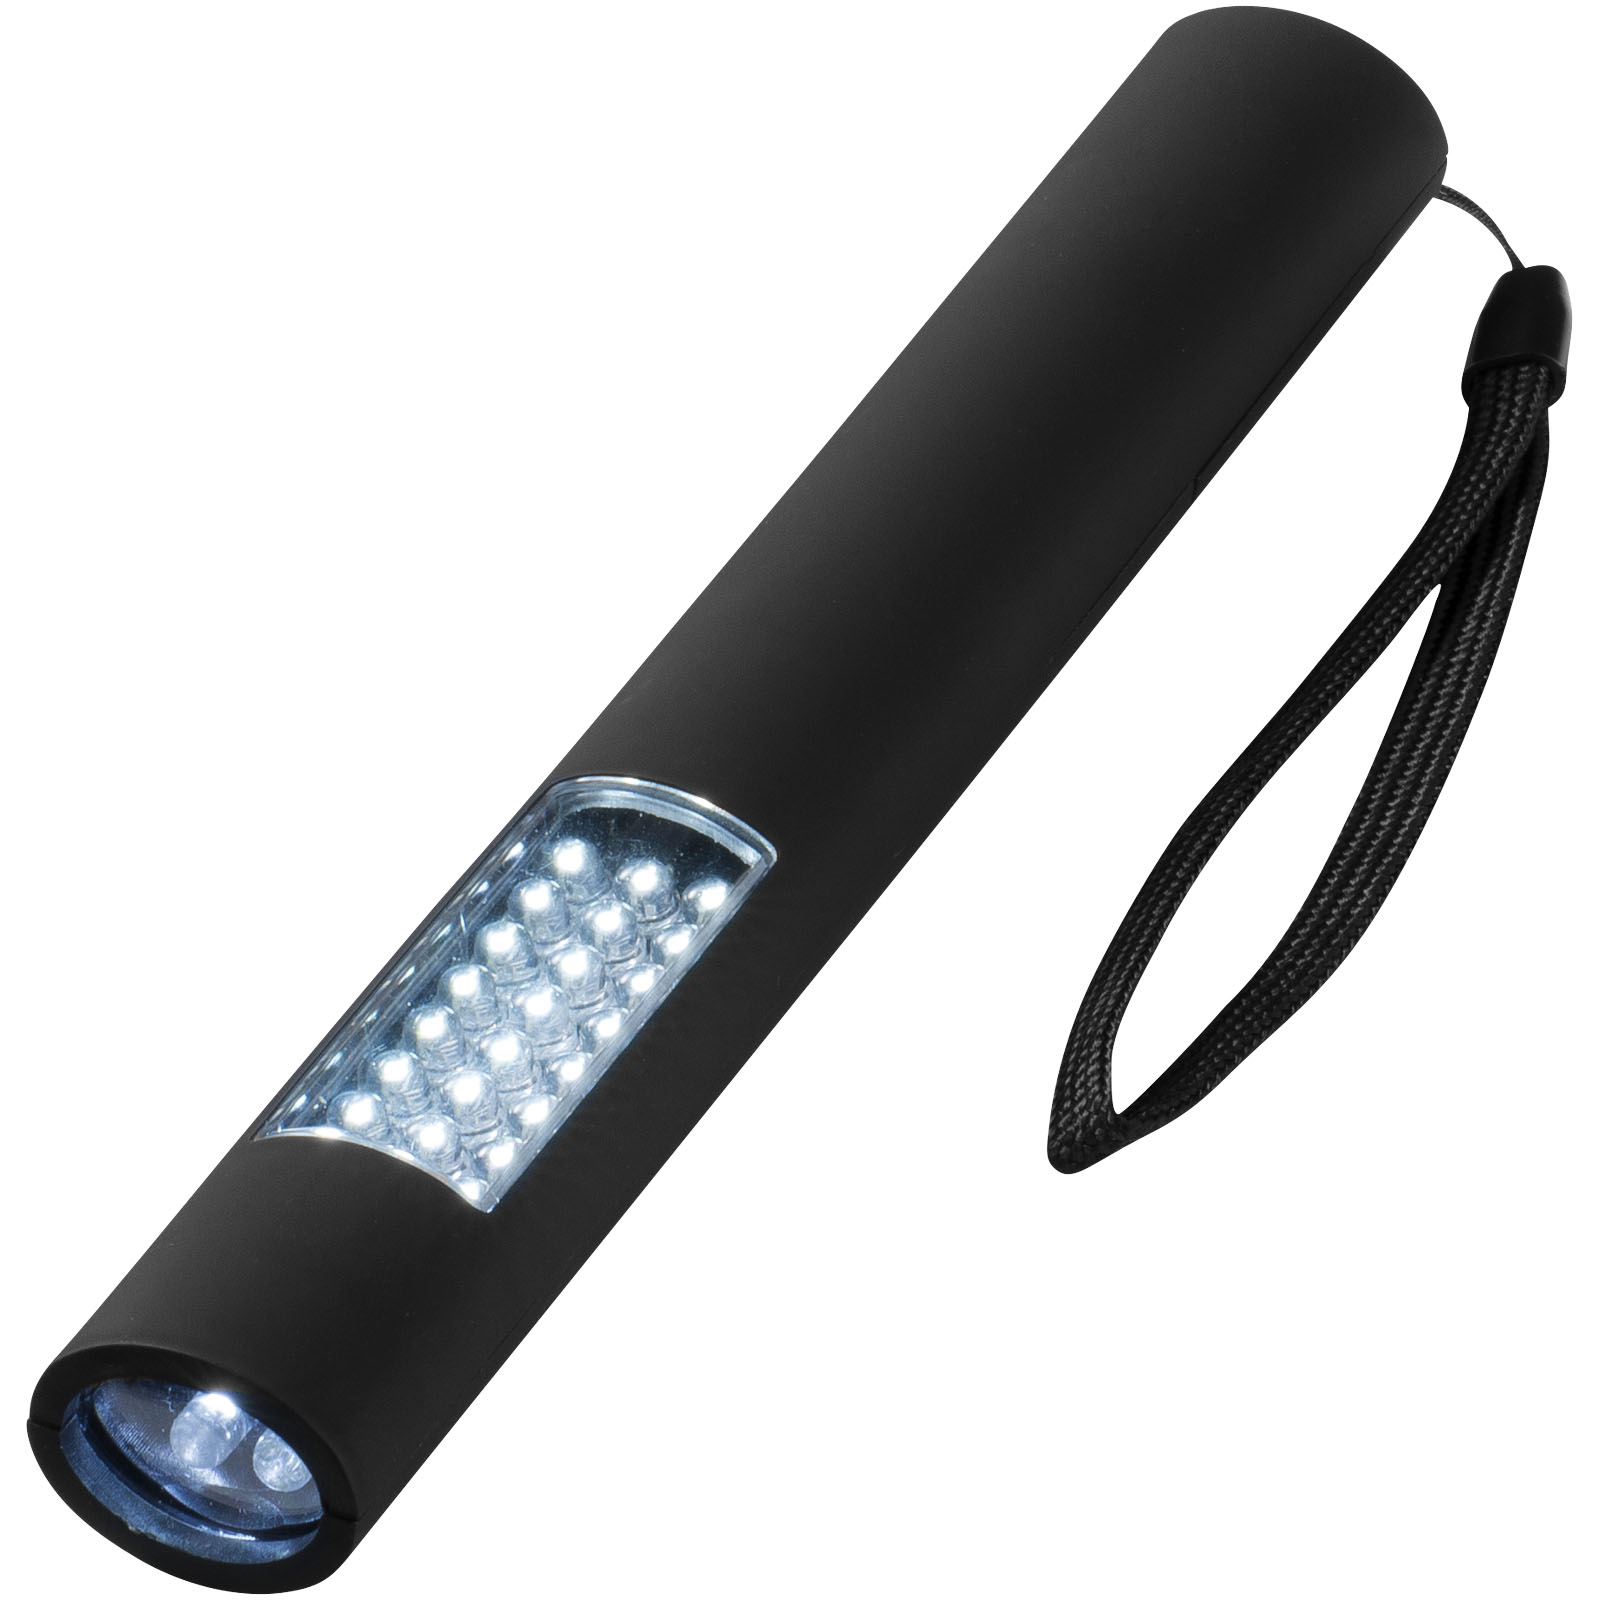 Tools & Car Accessories - Lutz 28-LED magnetic torch light